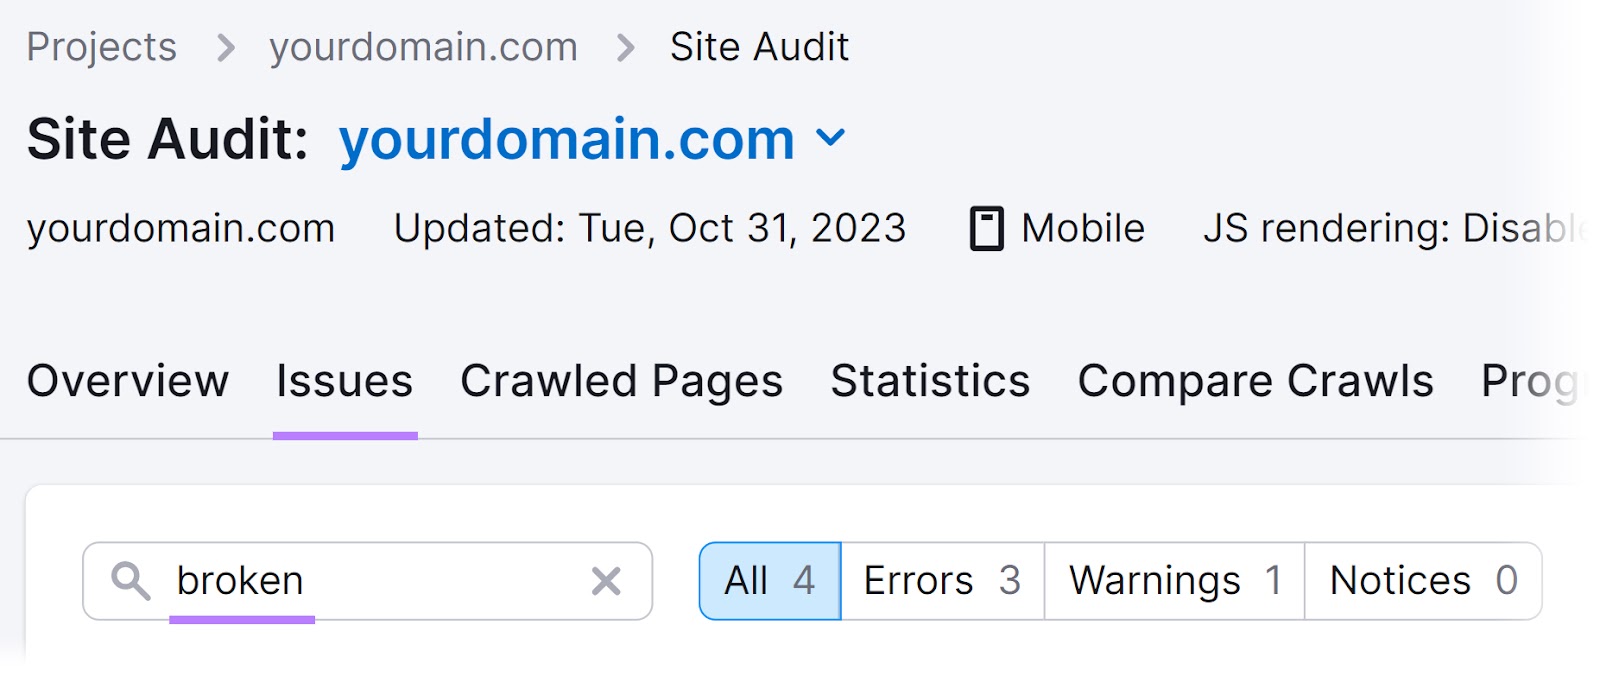 "broken" entered into the search under "Issues" tab in Site Audit